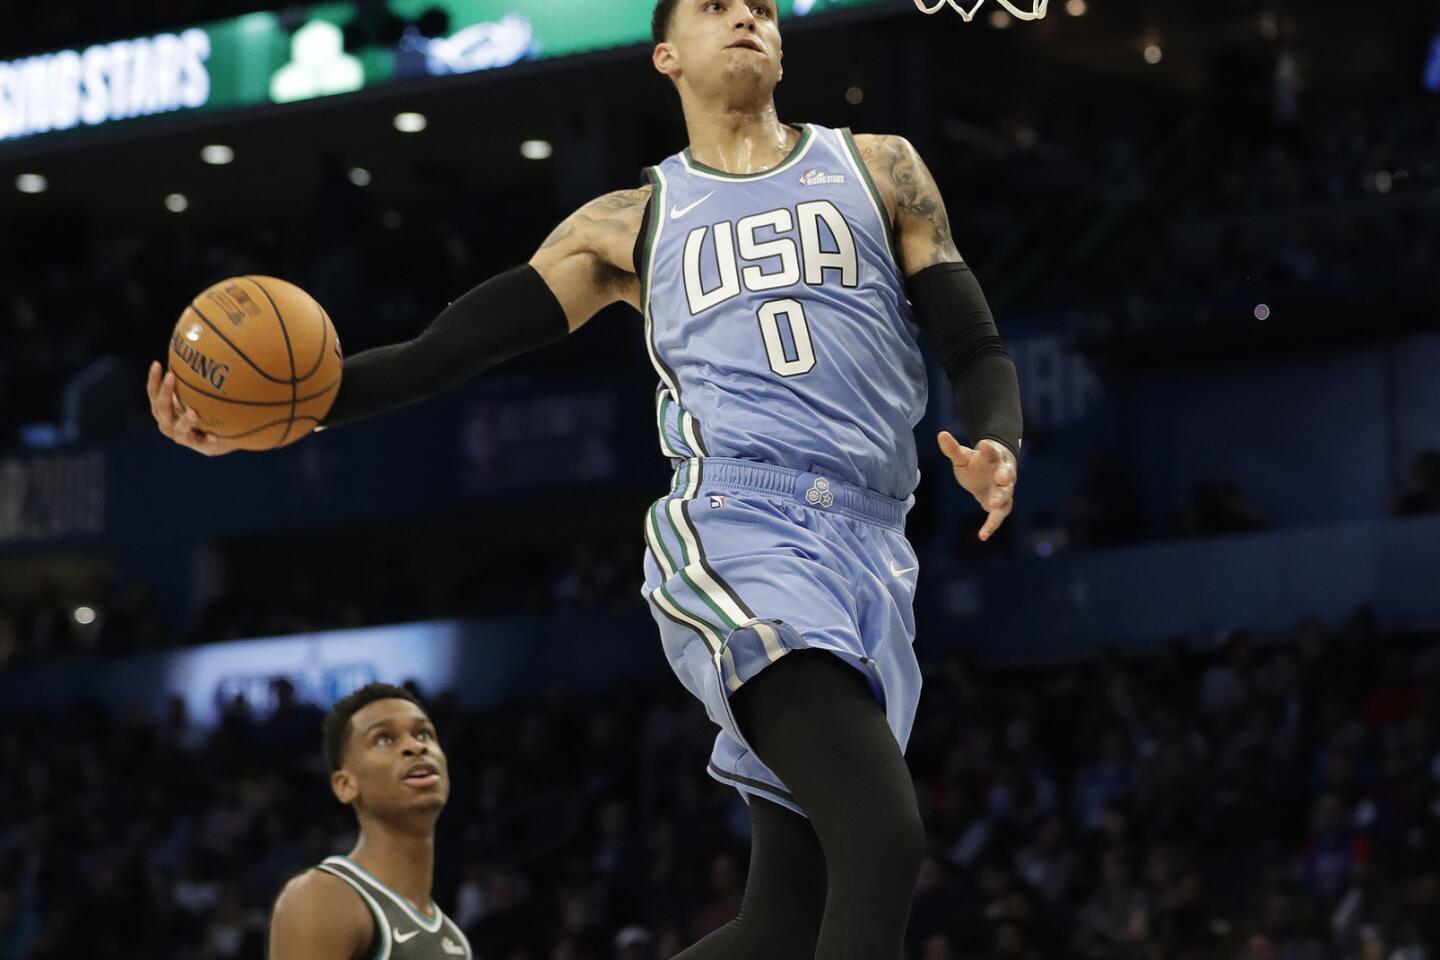 To Lakers' Kyle Kuzma, Rising Stars MVP means a little more than